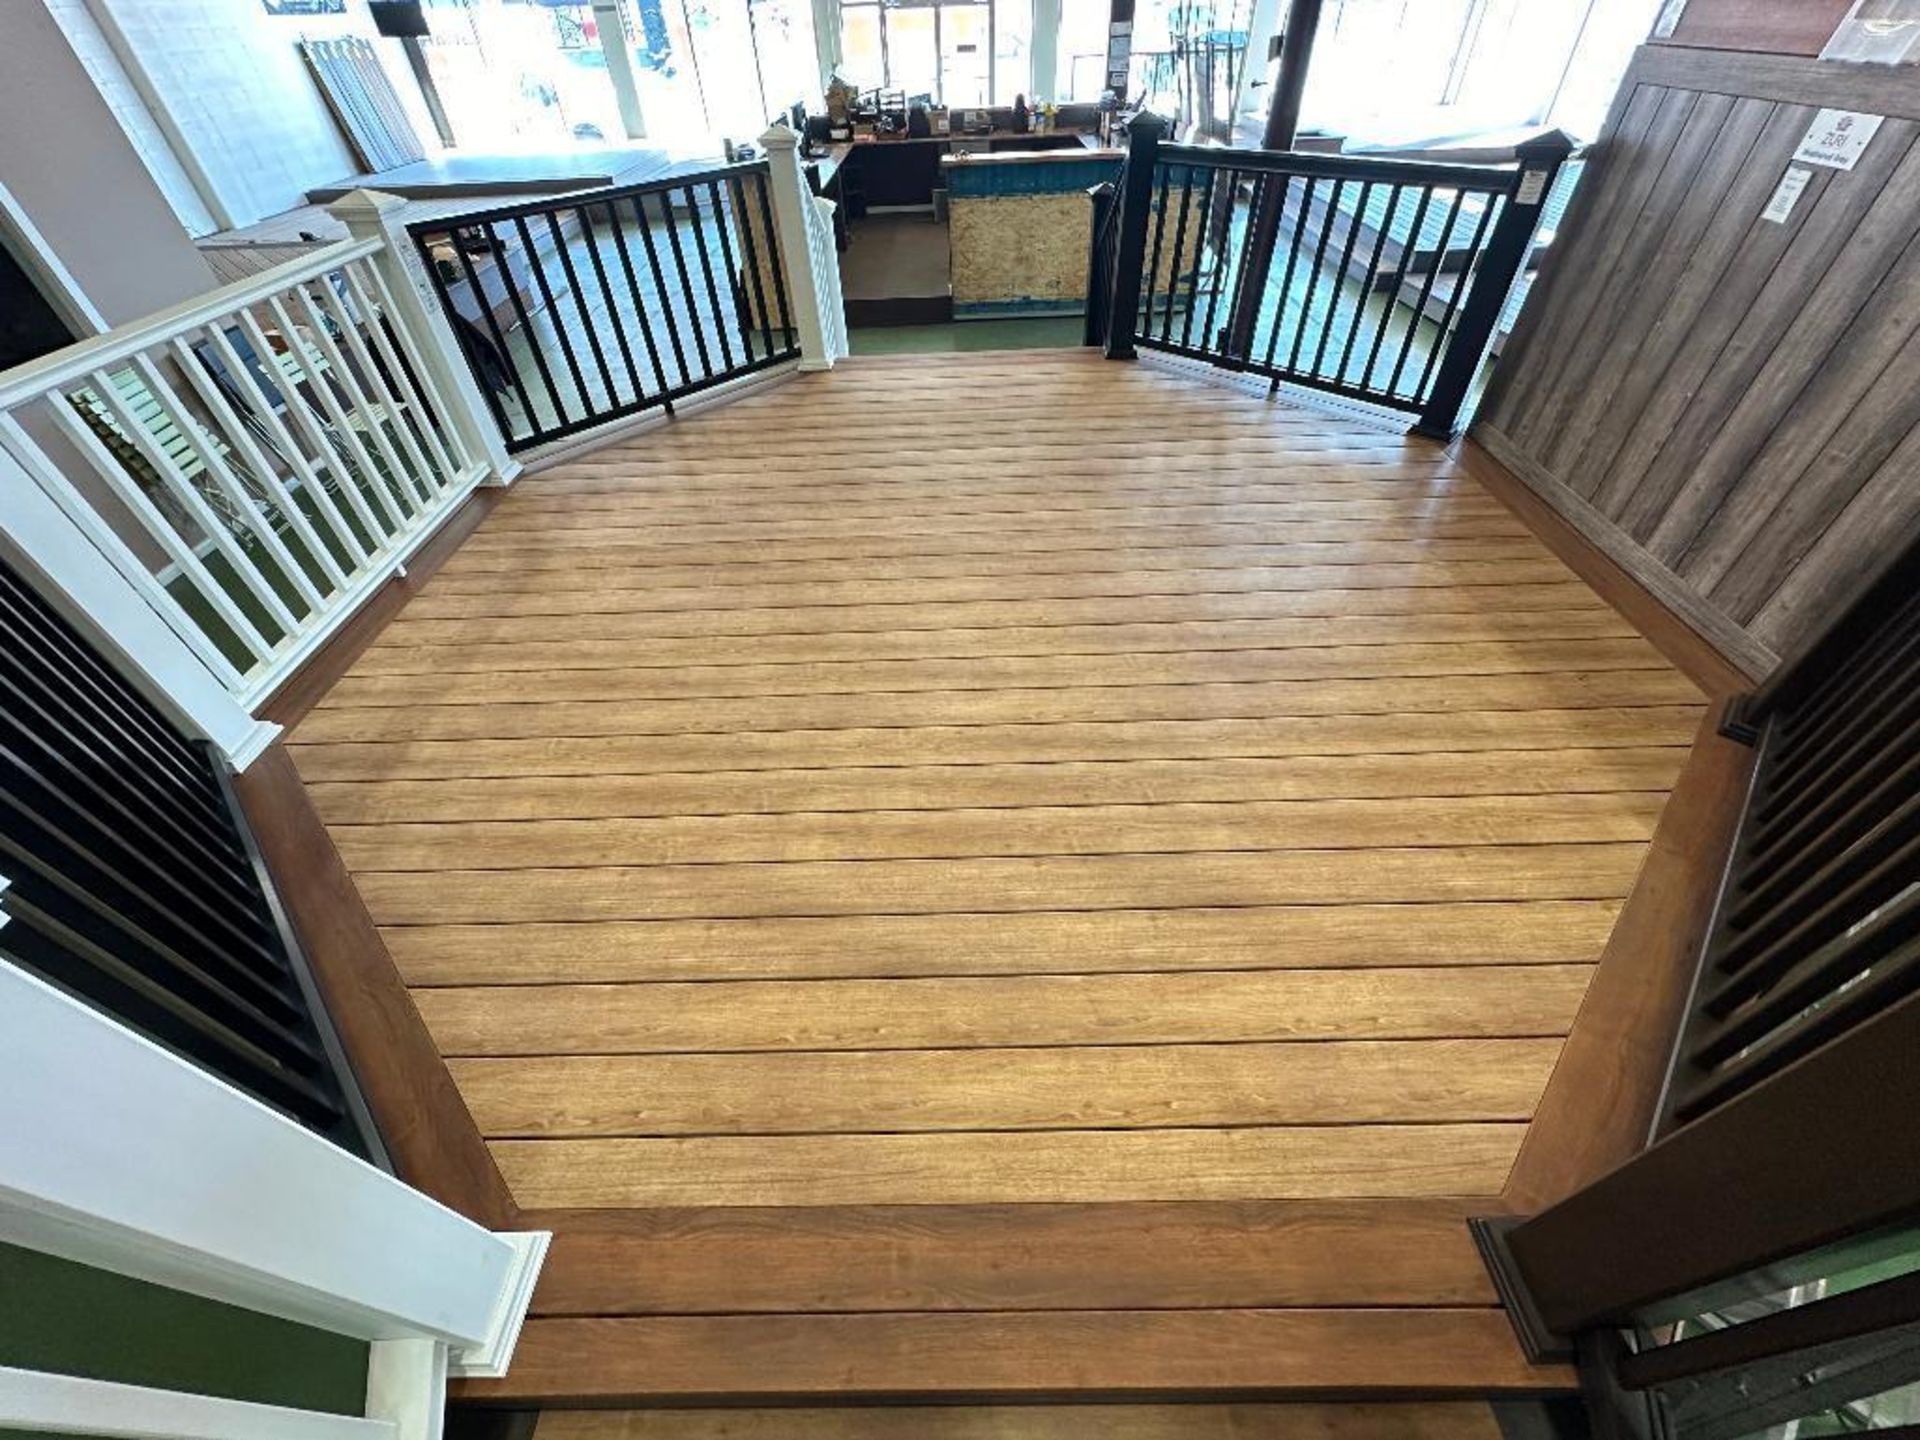 171" X 171" Octagonal Composite Deck w/ (2) 71" 3-Stair Risers, Composite Privacy Walls - Image 5 of 5